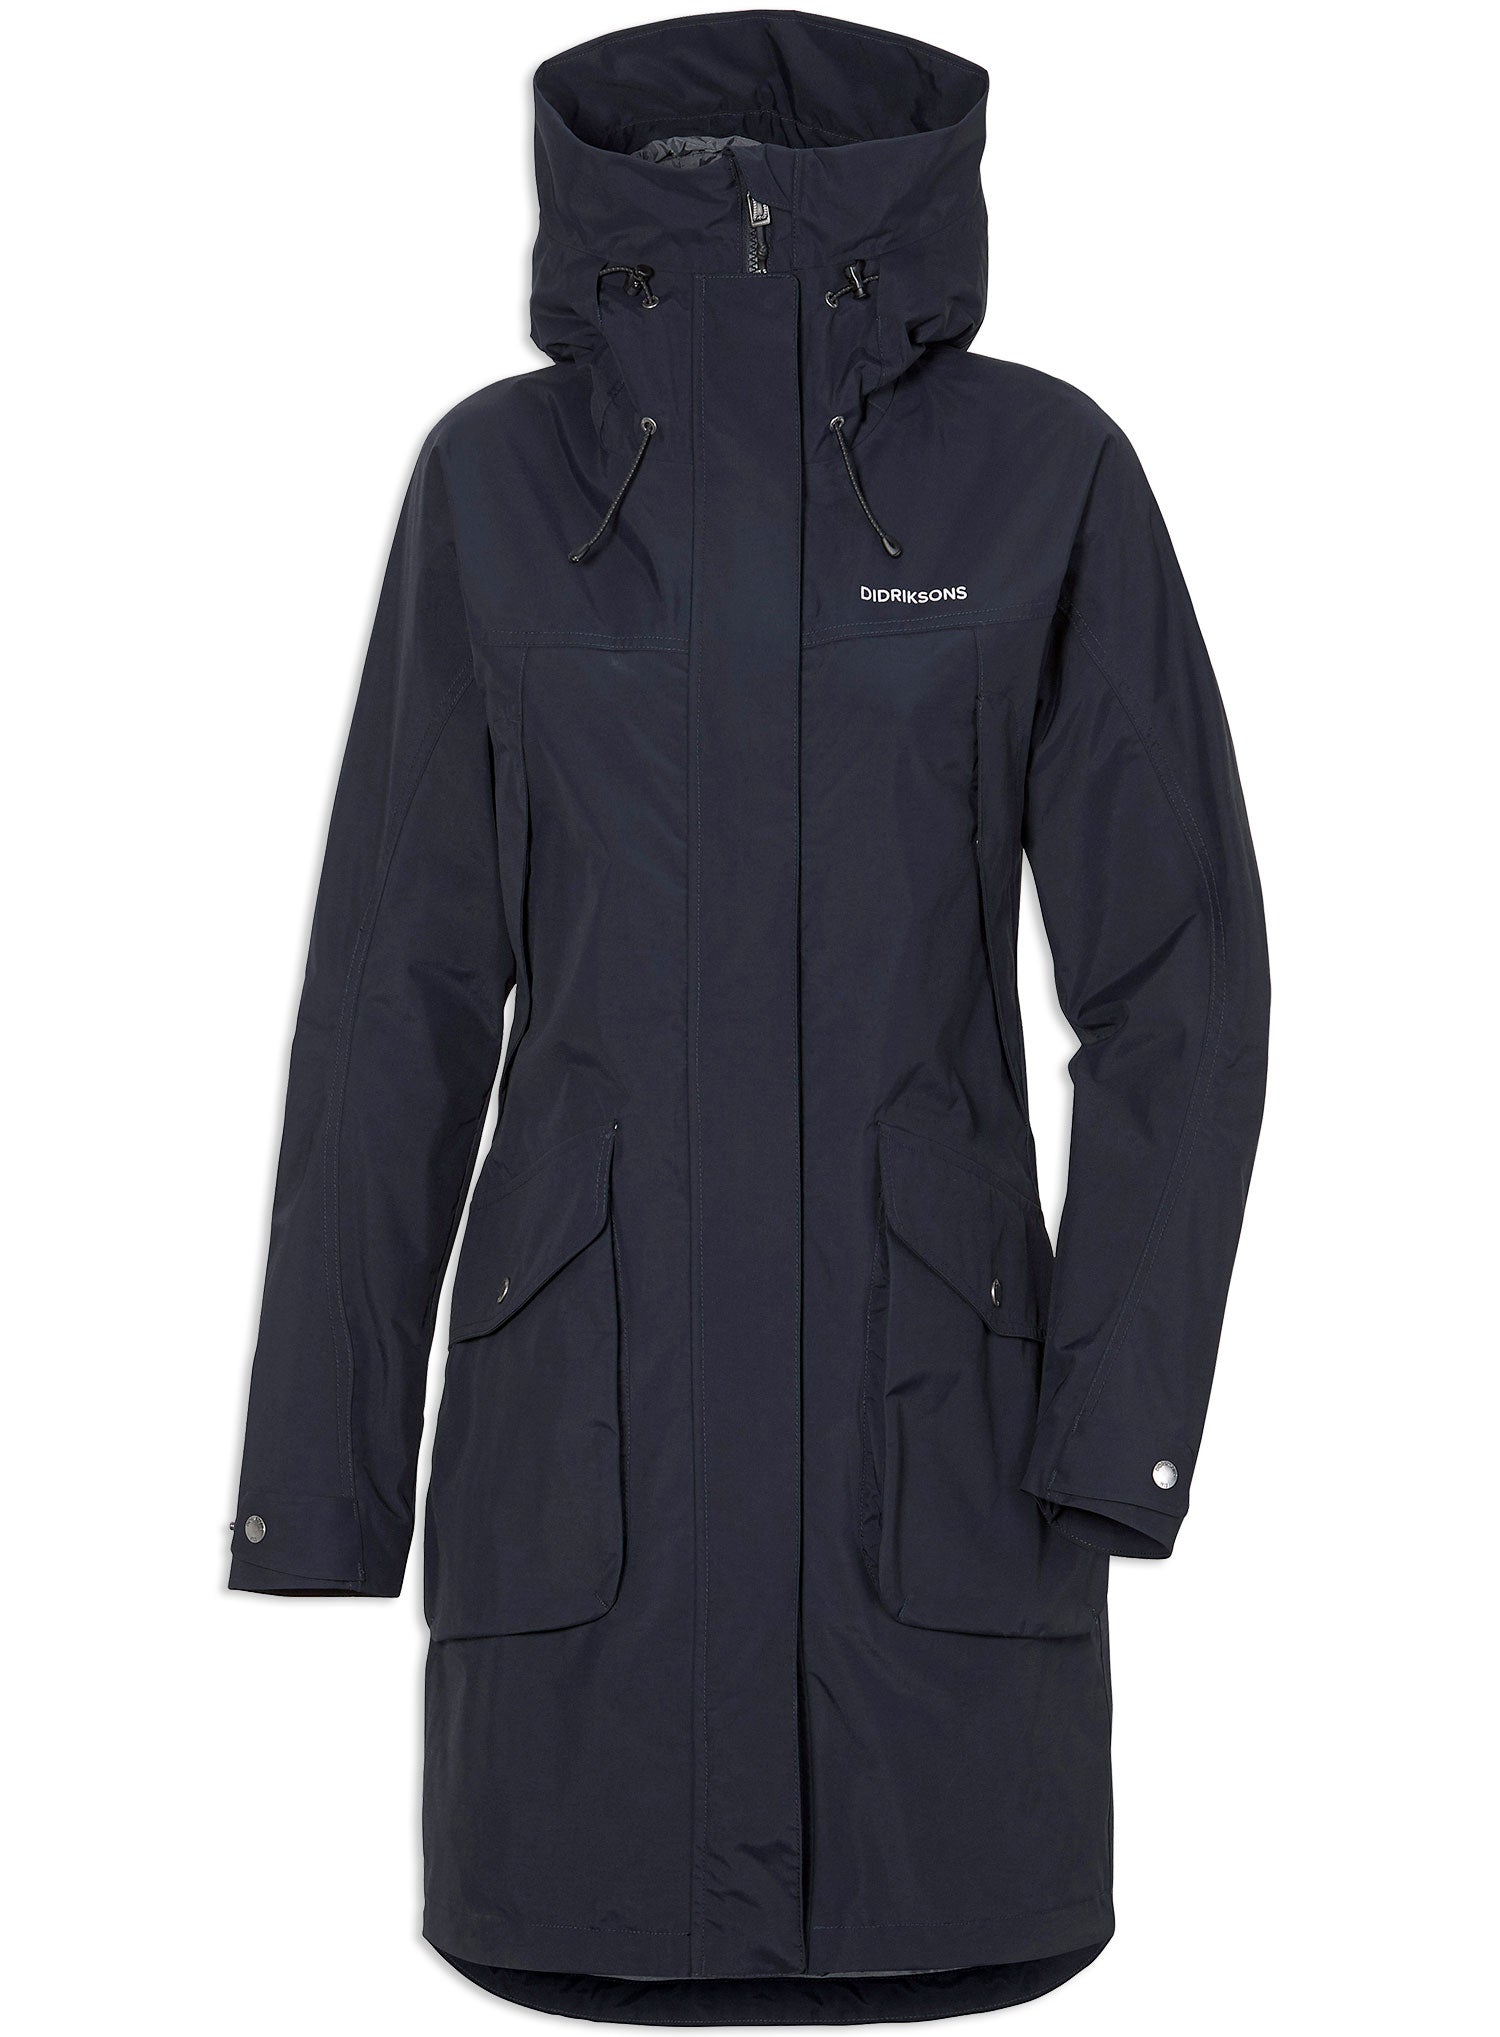 Dark night Blue new Thelma coat - our best selling 3/4 length women&